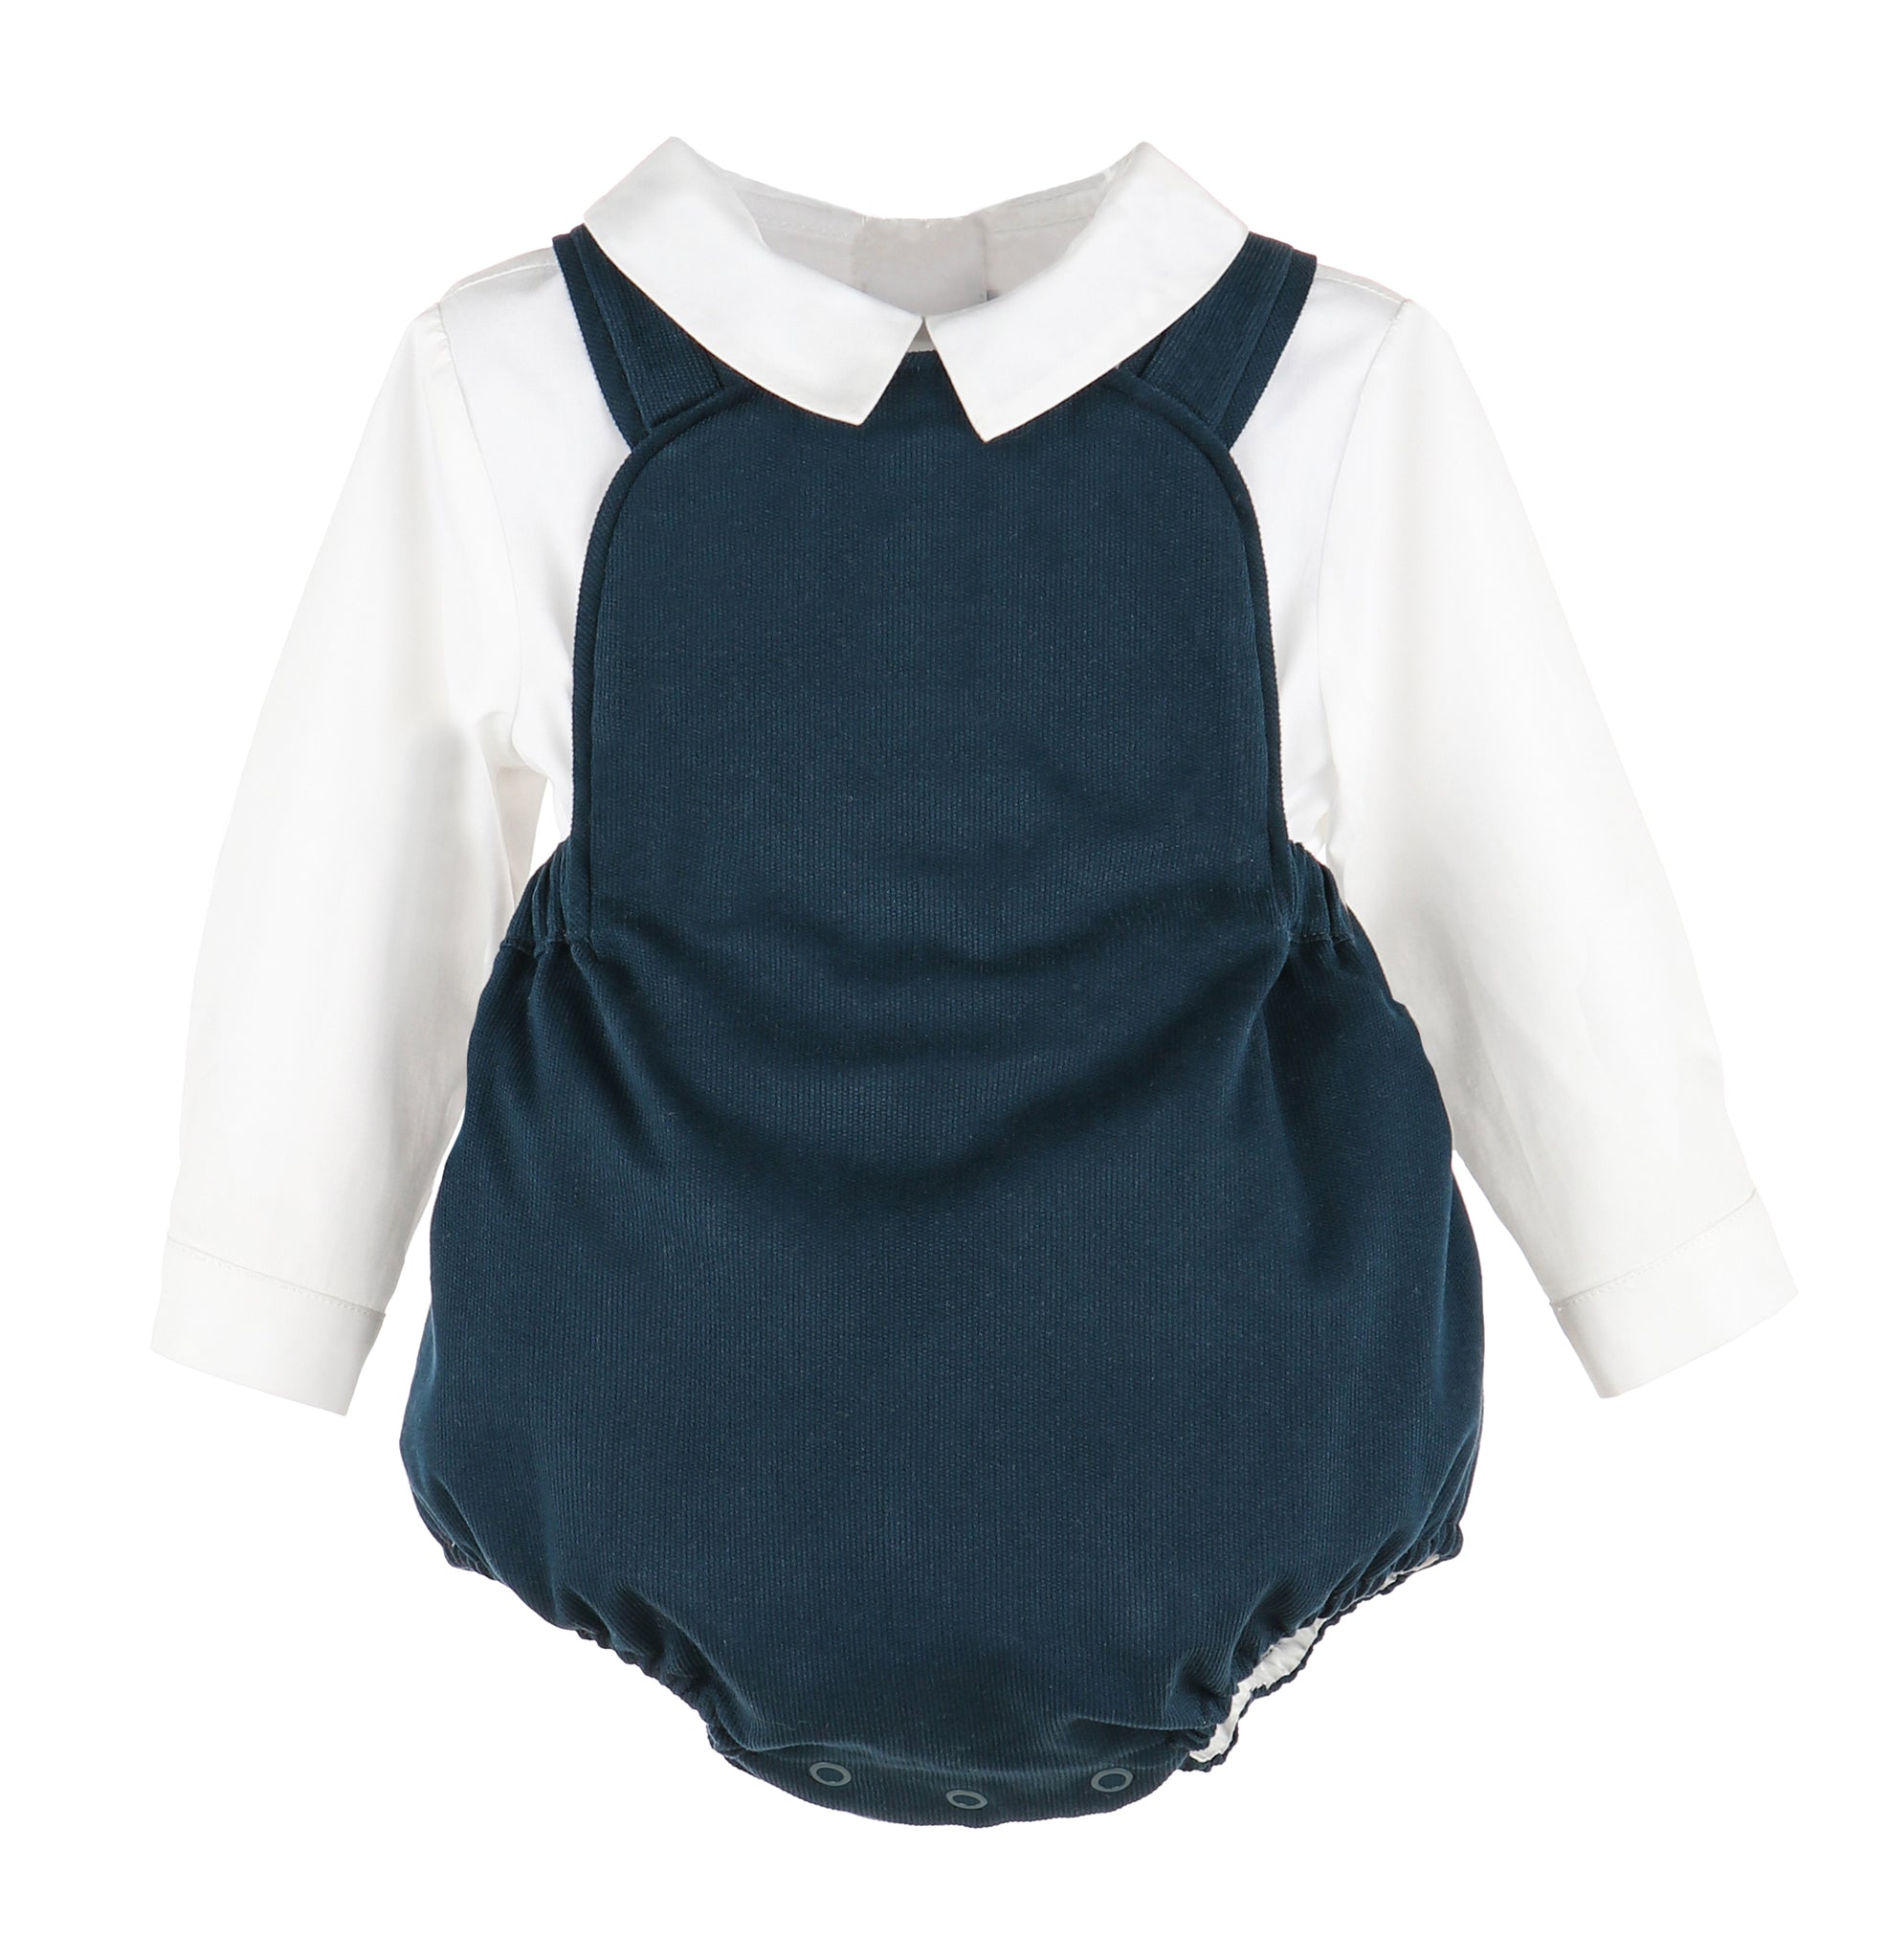 THE CLASSIC'S VINTAGE BOY OVERALL, NAVY - SL3334 (12M & 3T)